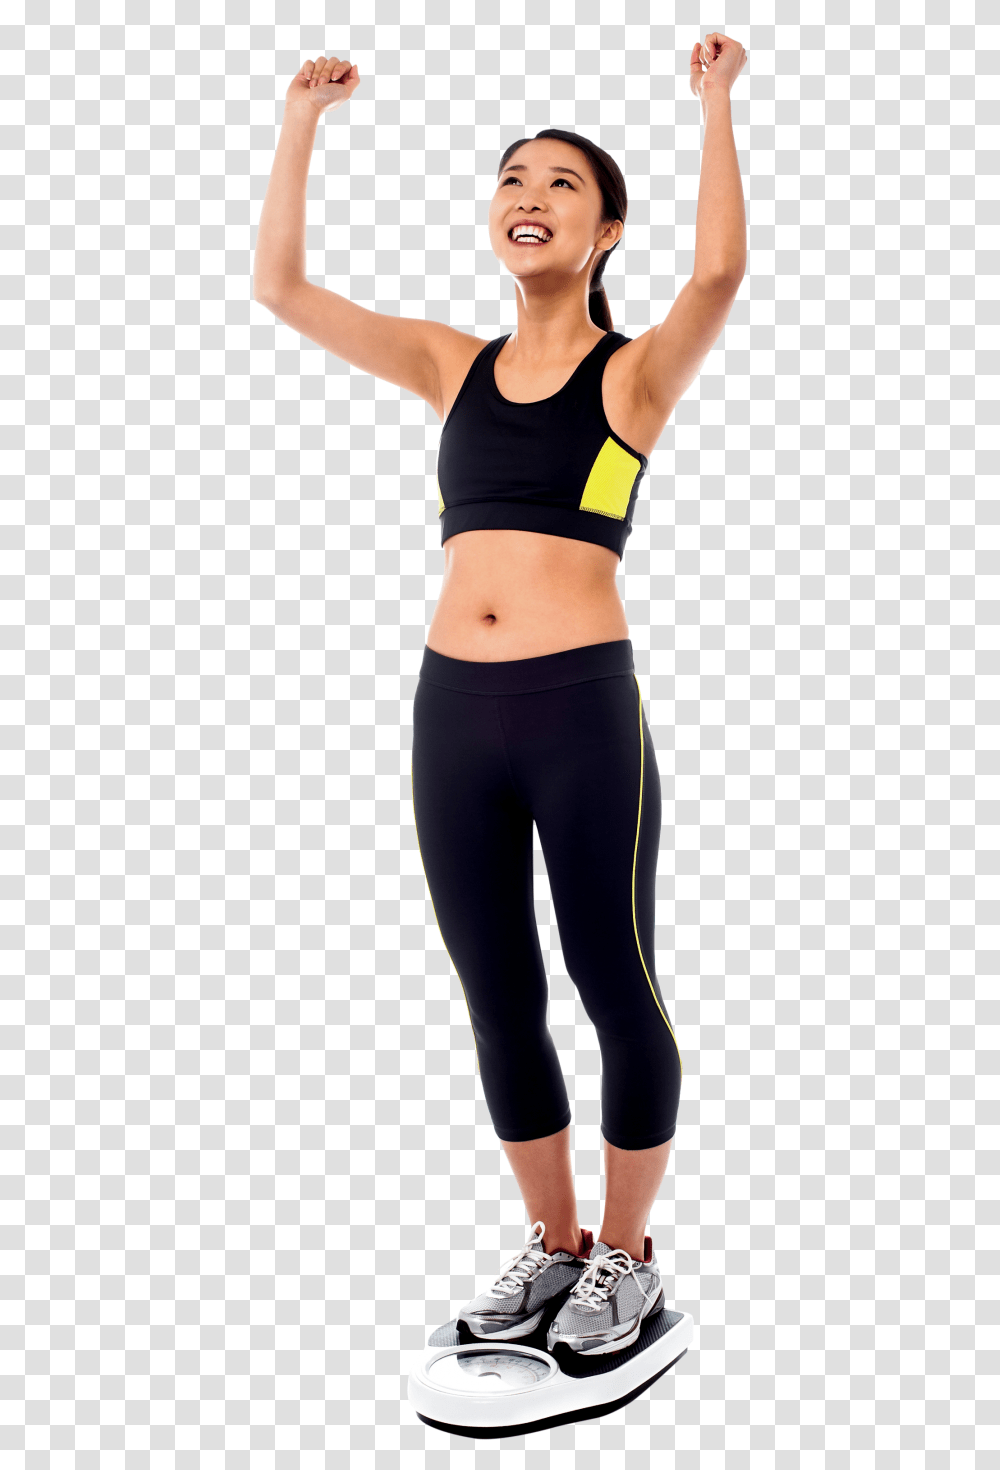 Happy Women Image Weight Loss Women, Person, Human, Spandex Transparent Png